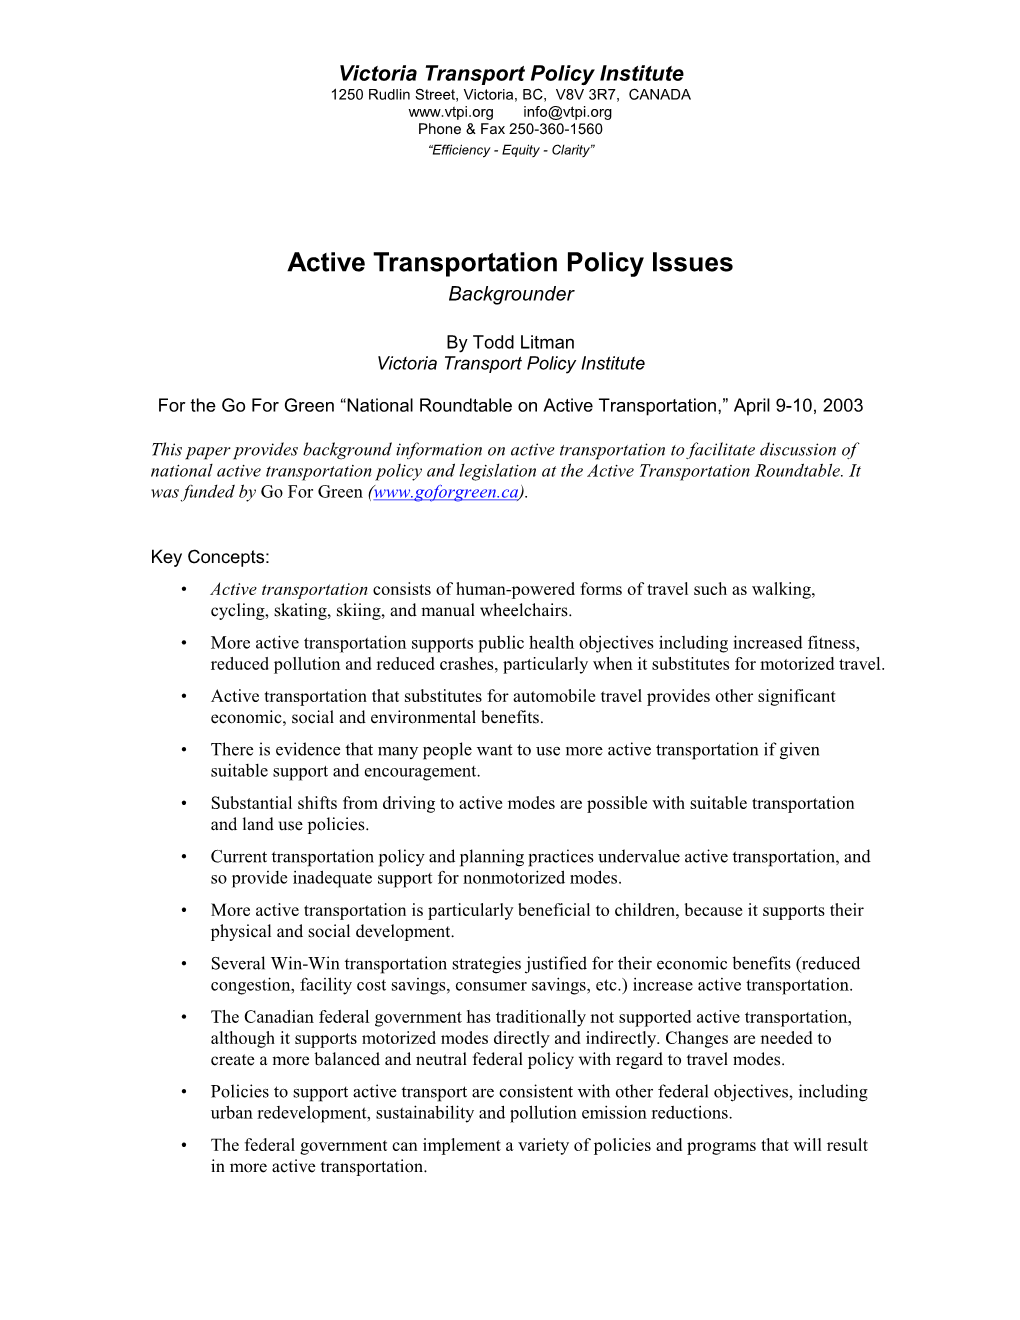 Active Transportation Policy Issues Backgrounder